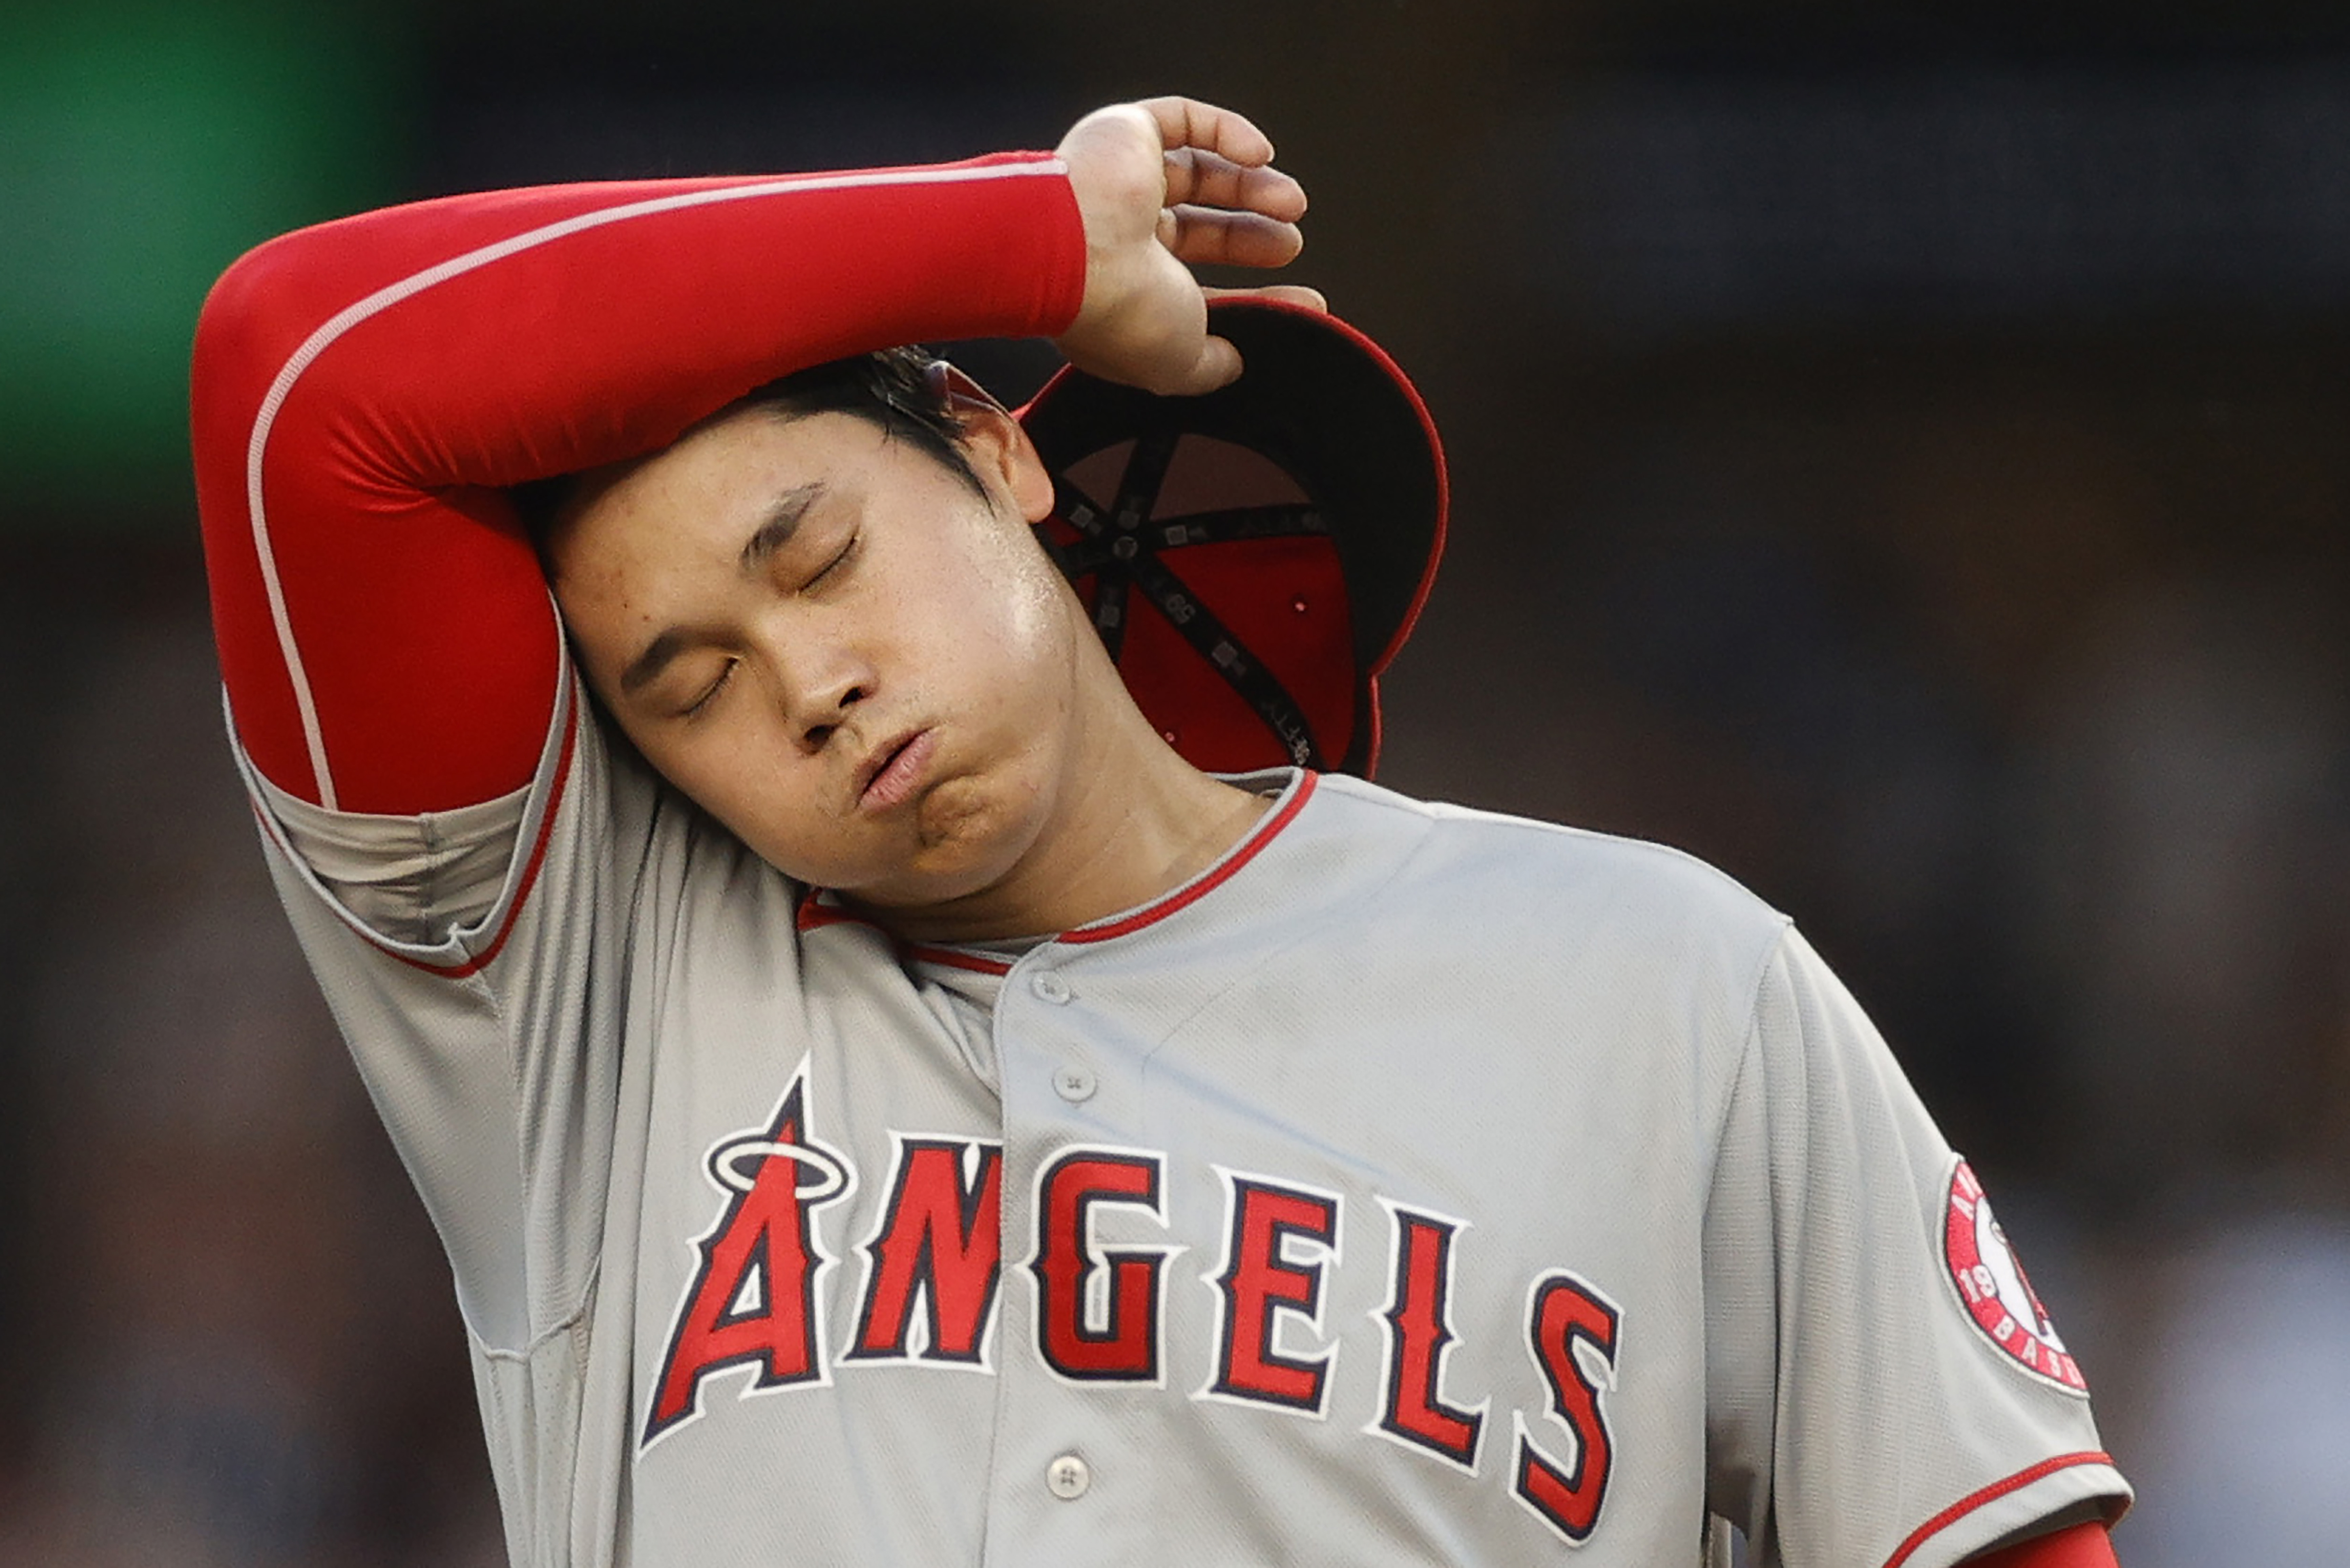 Shohei Ohtani will be starting pitcher for AL in All-Star game